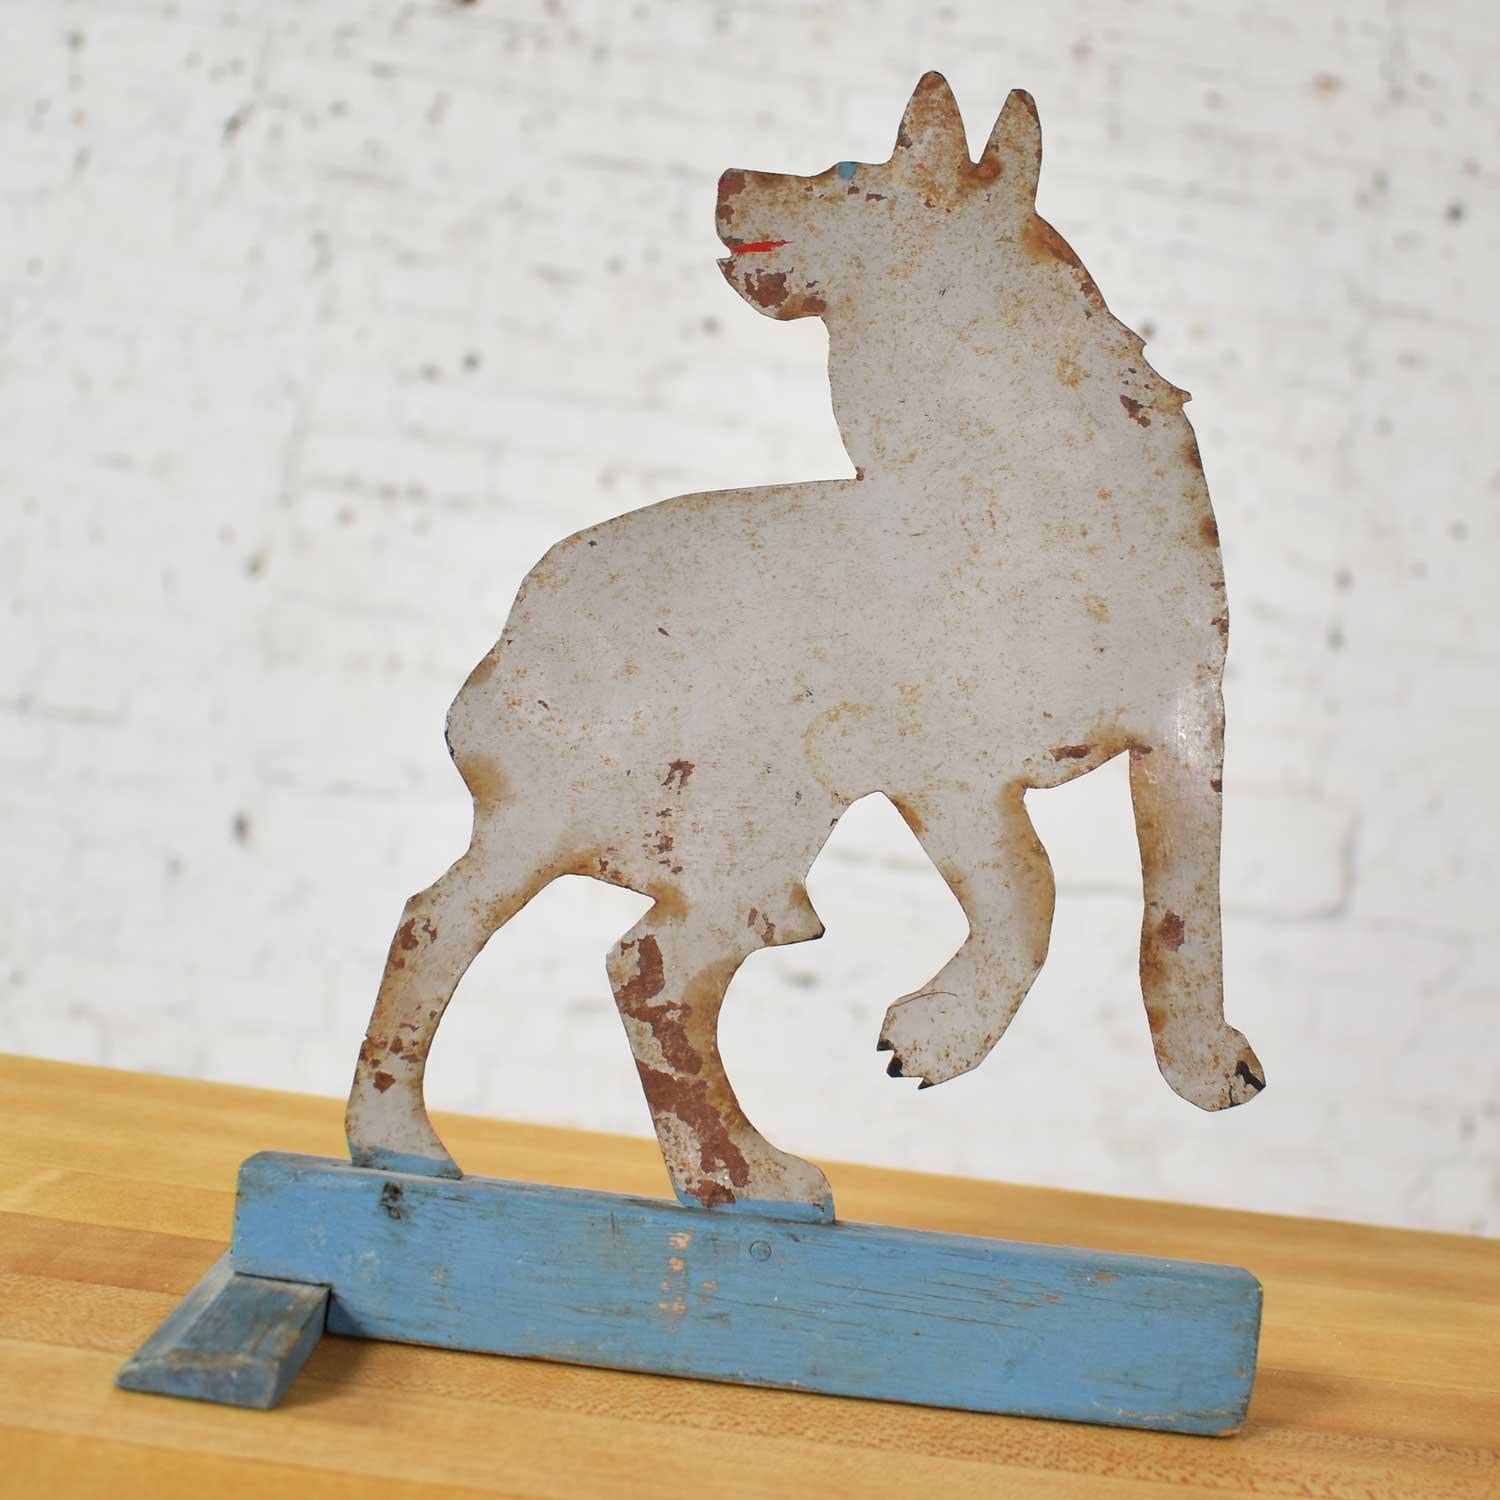 Antique Dog or Wolf Tin Cutout and Painted Folk Art Sculpture on a Wood Base 1